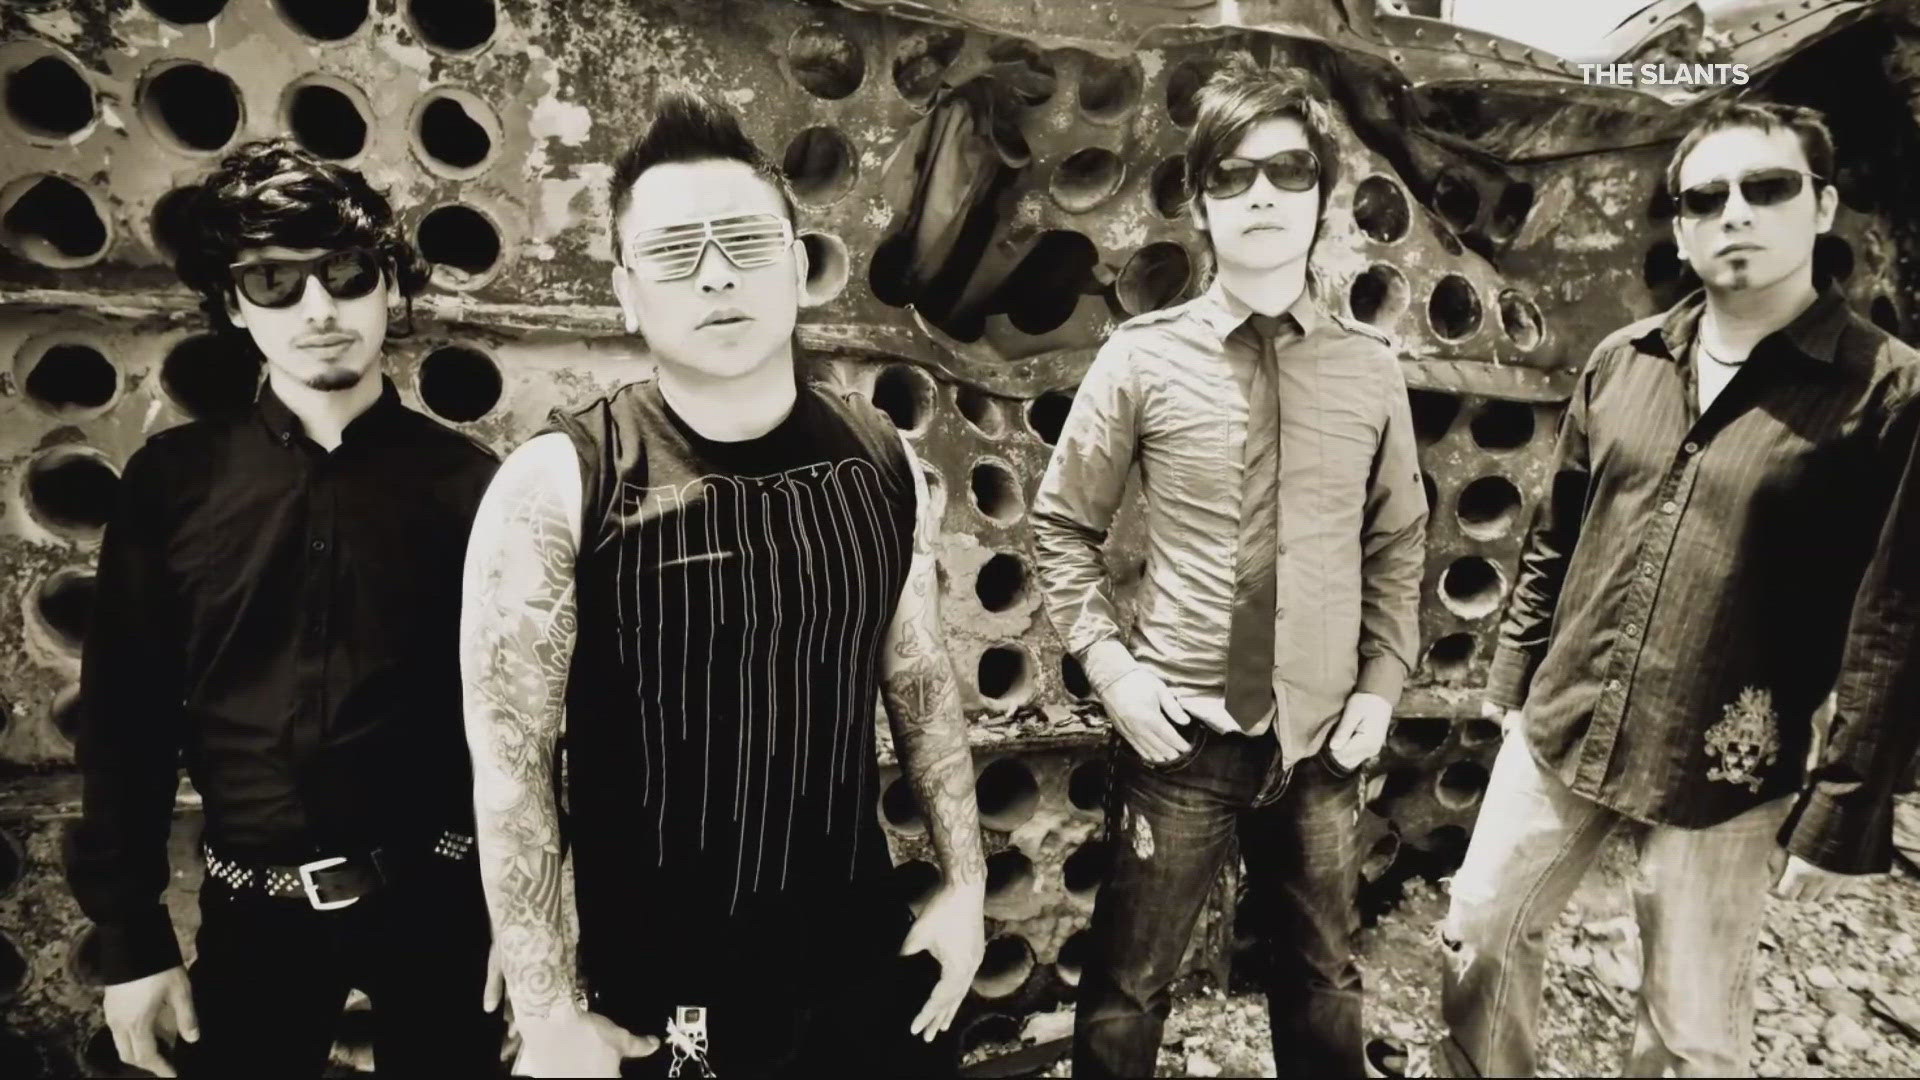 The Slants formed in 2006 with an all Asian American group of musicians. As an anti-racist move, they made the slur their name to neutralize it.